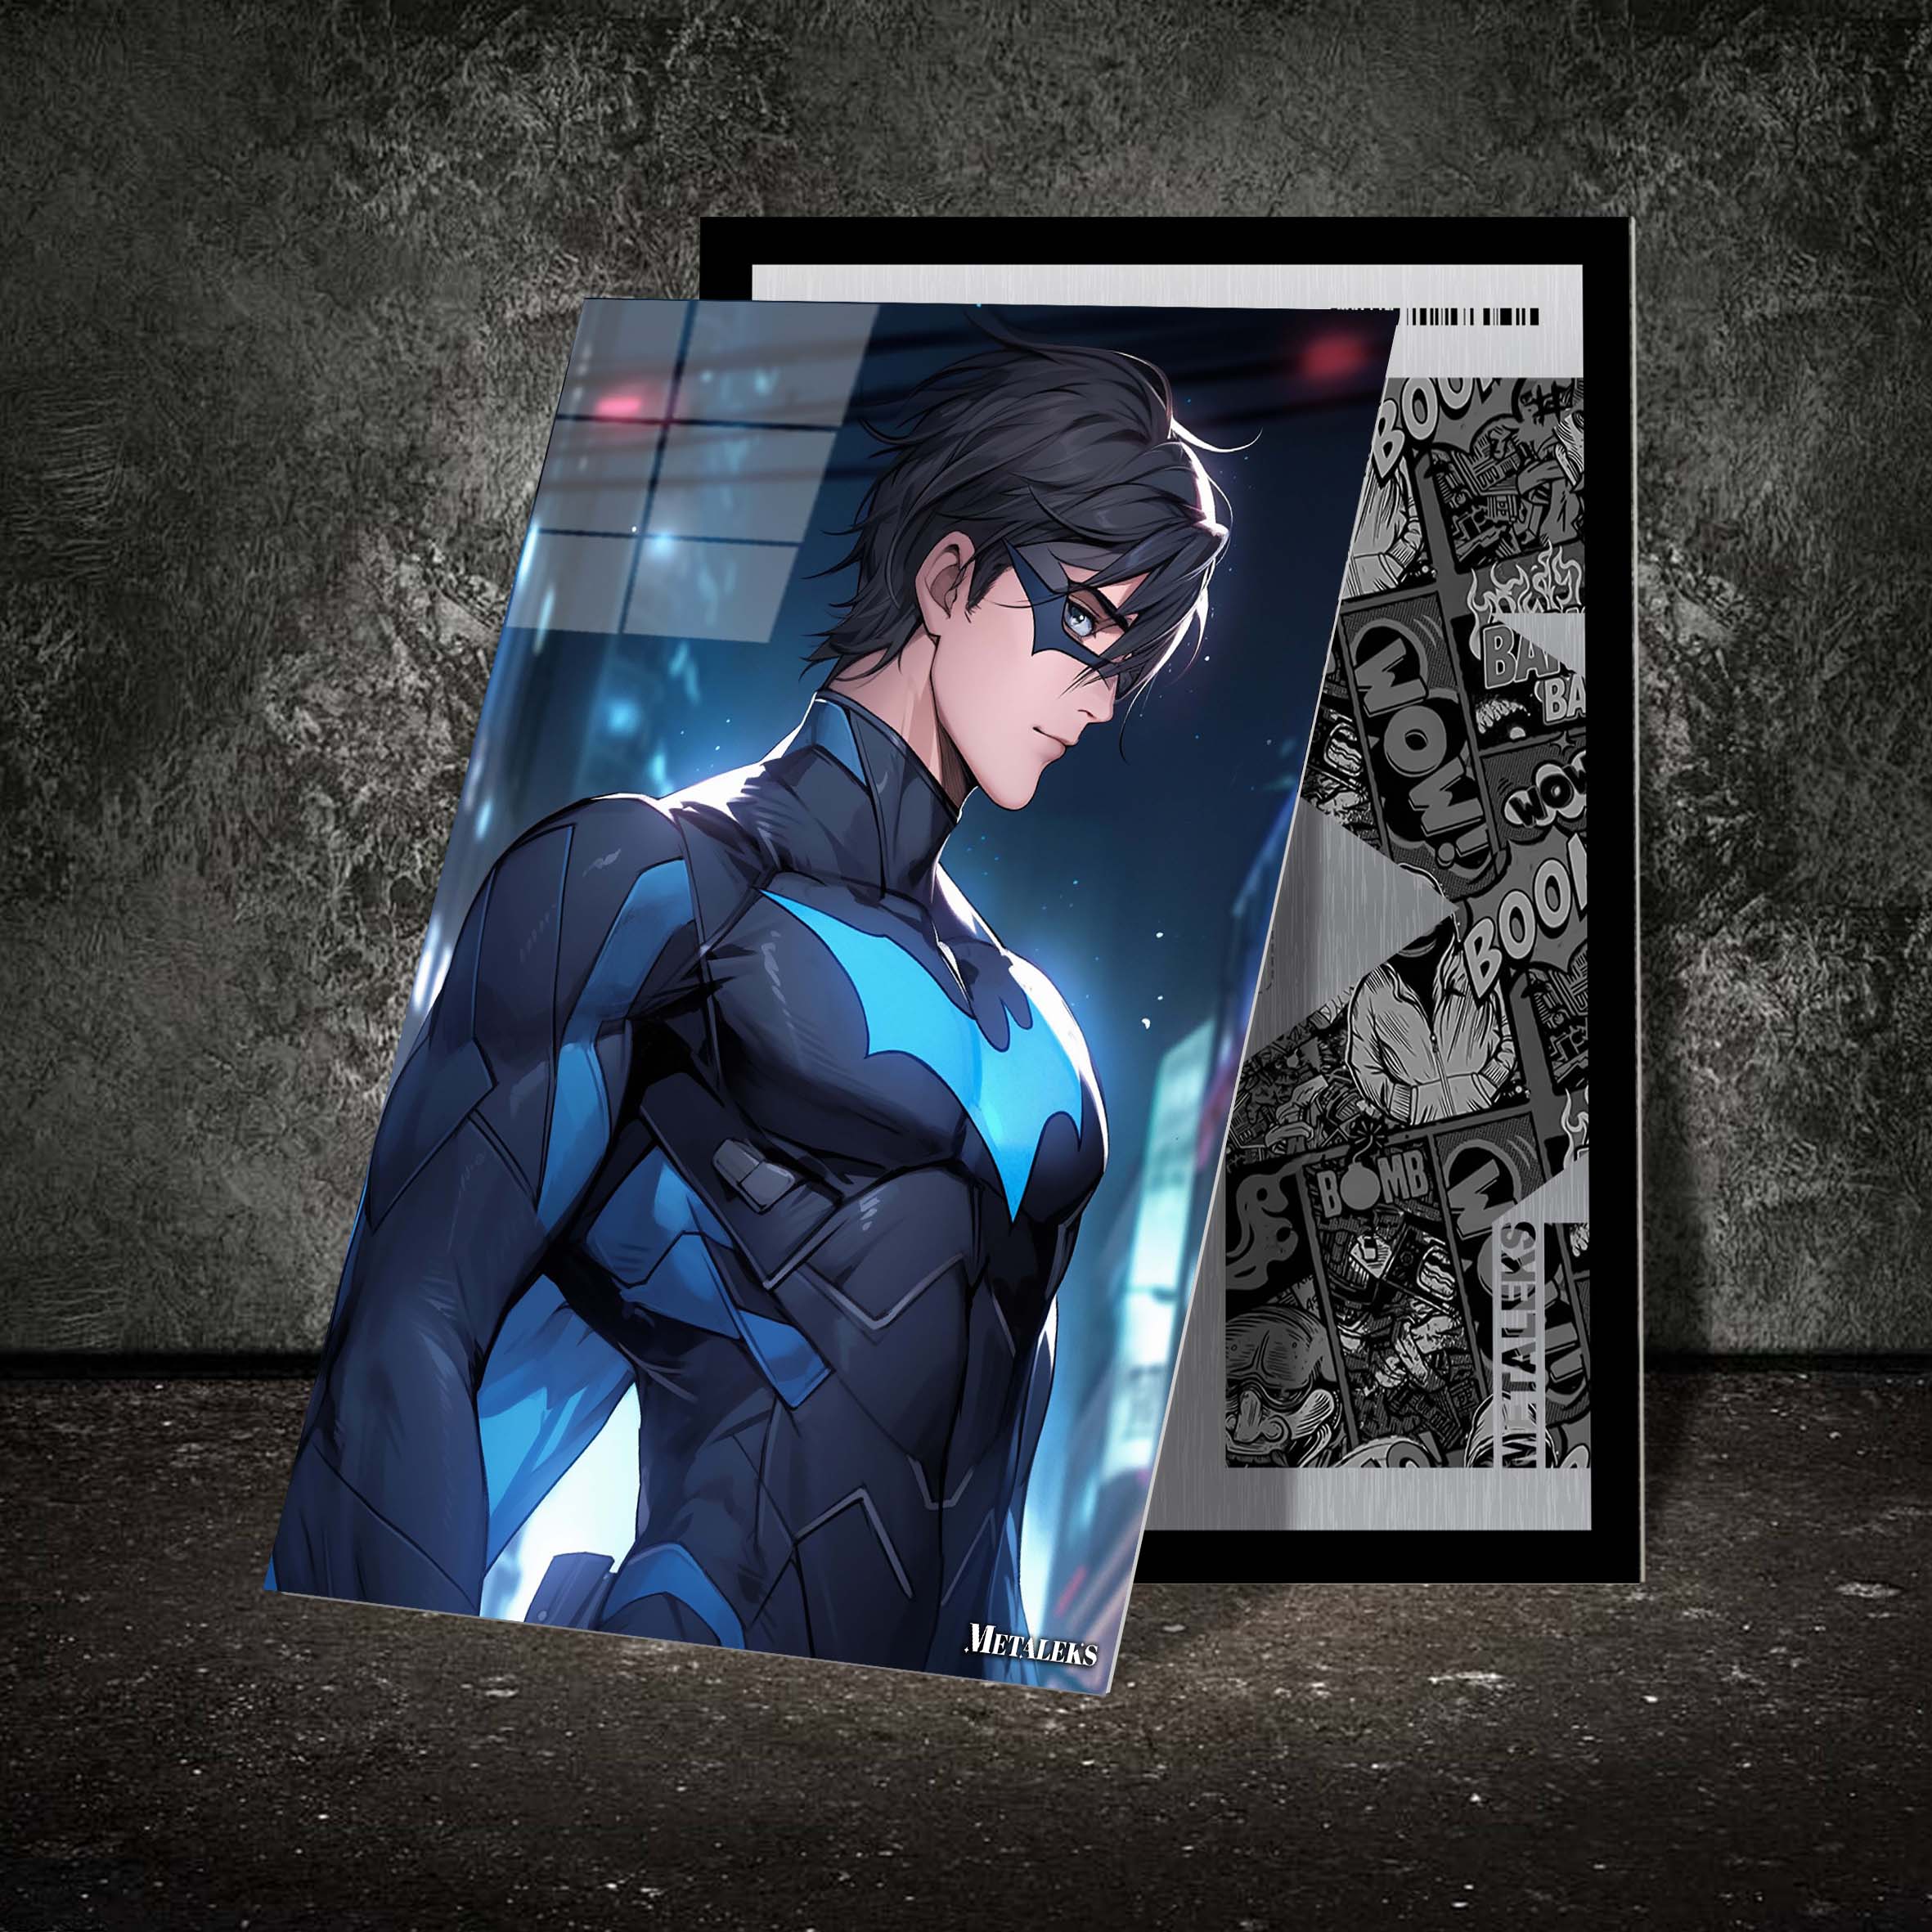 Gotham's Night Guardian_ Nightwing's Urban Chronicles-designed by @theanimecrossover